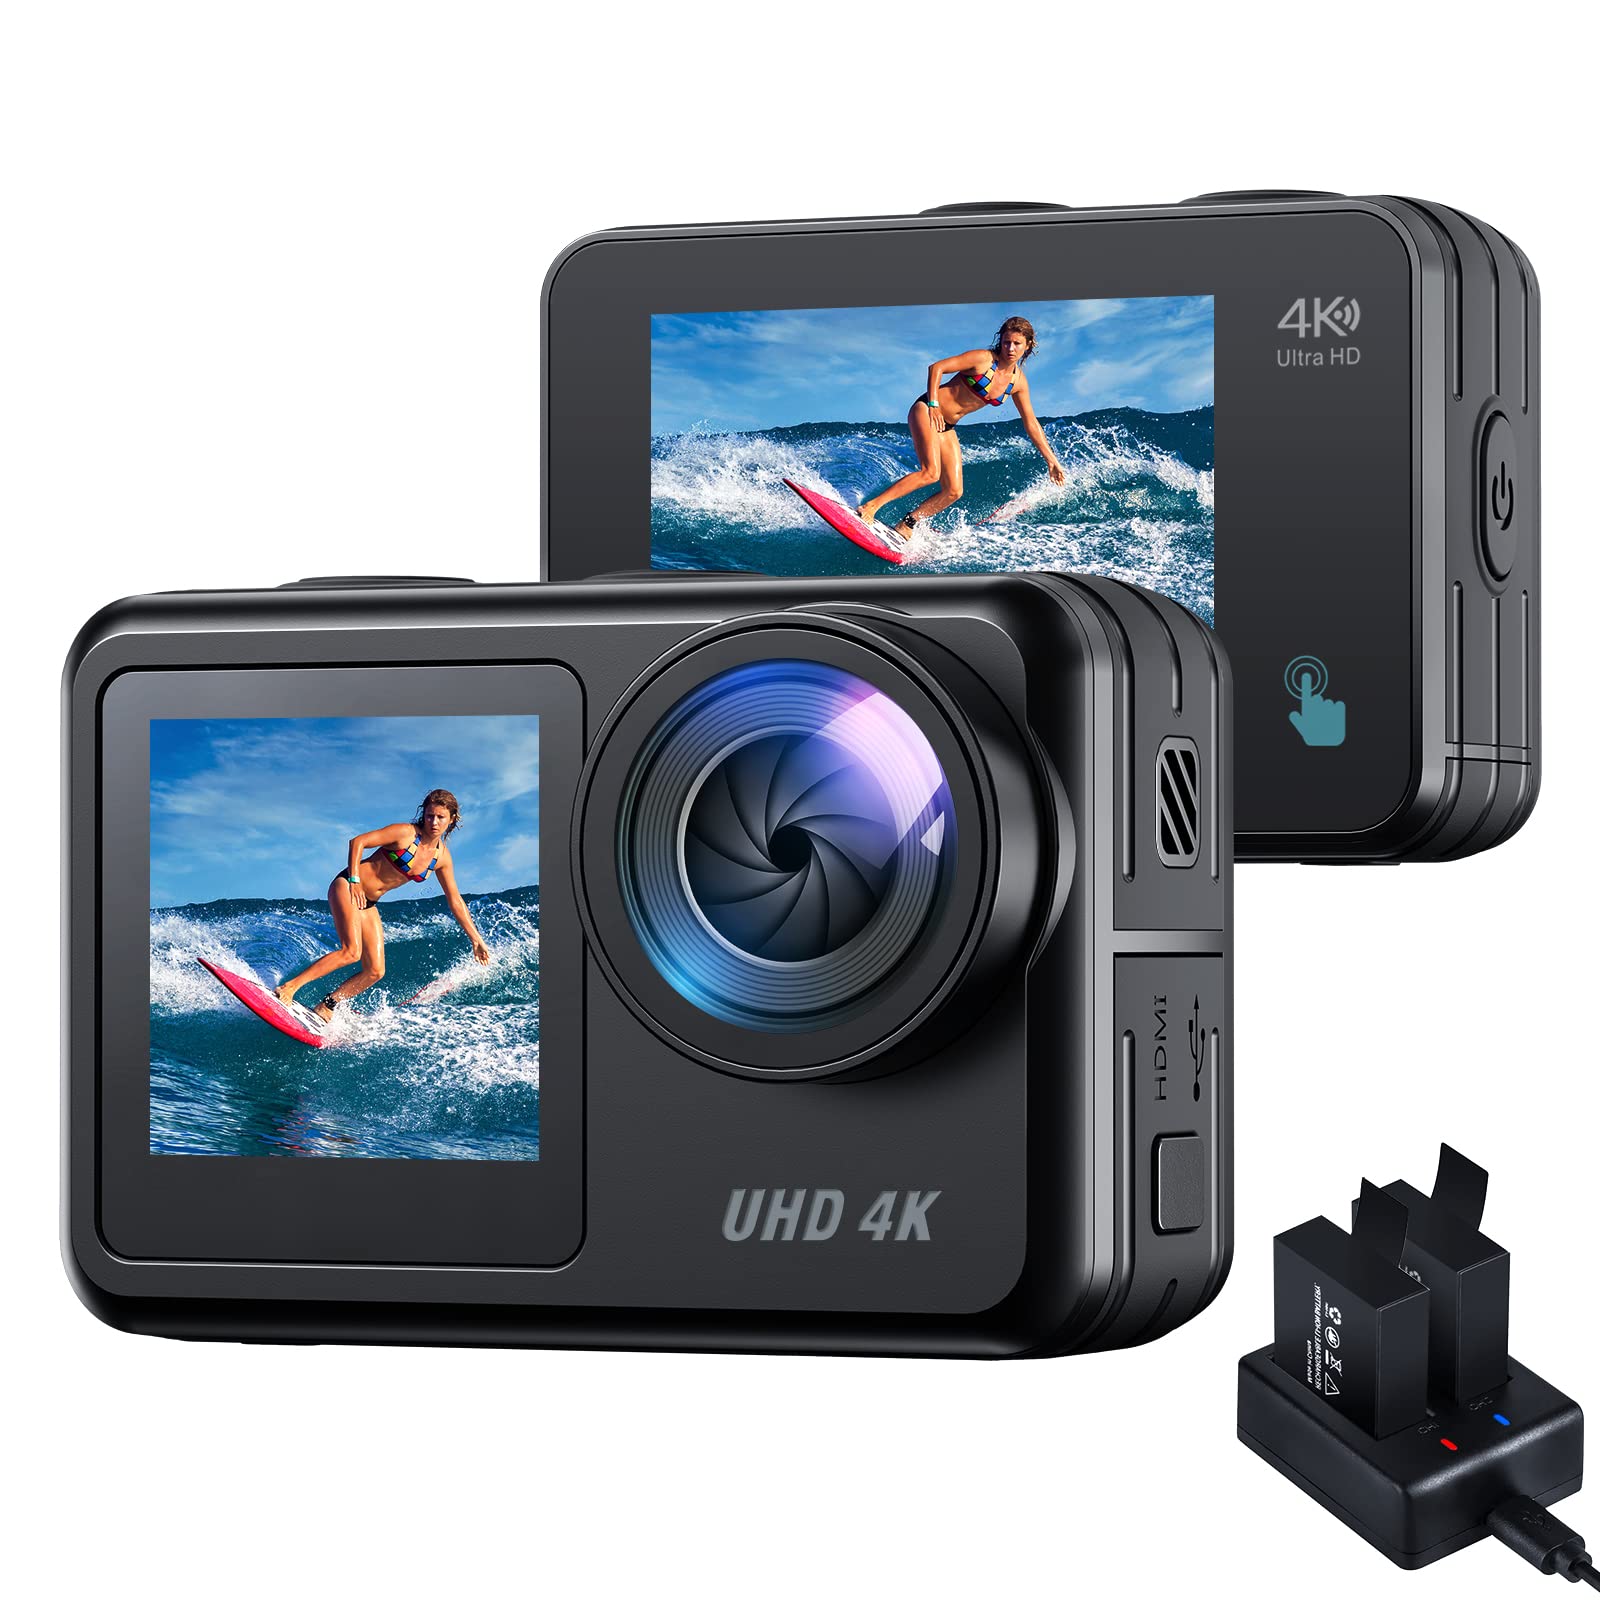 CAMWORLD 4K 20MP Action Camera Dual Screen 40M Waterproof Underwater Camera, WiFi Sports PC Webcam with EIS Remote Control, Charger and 2 Batteries